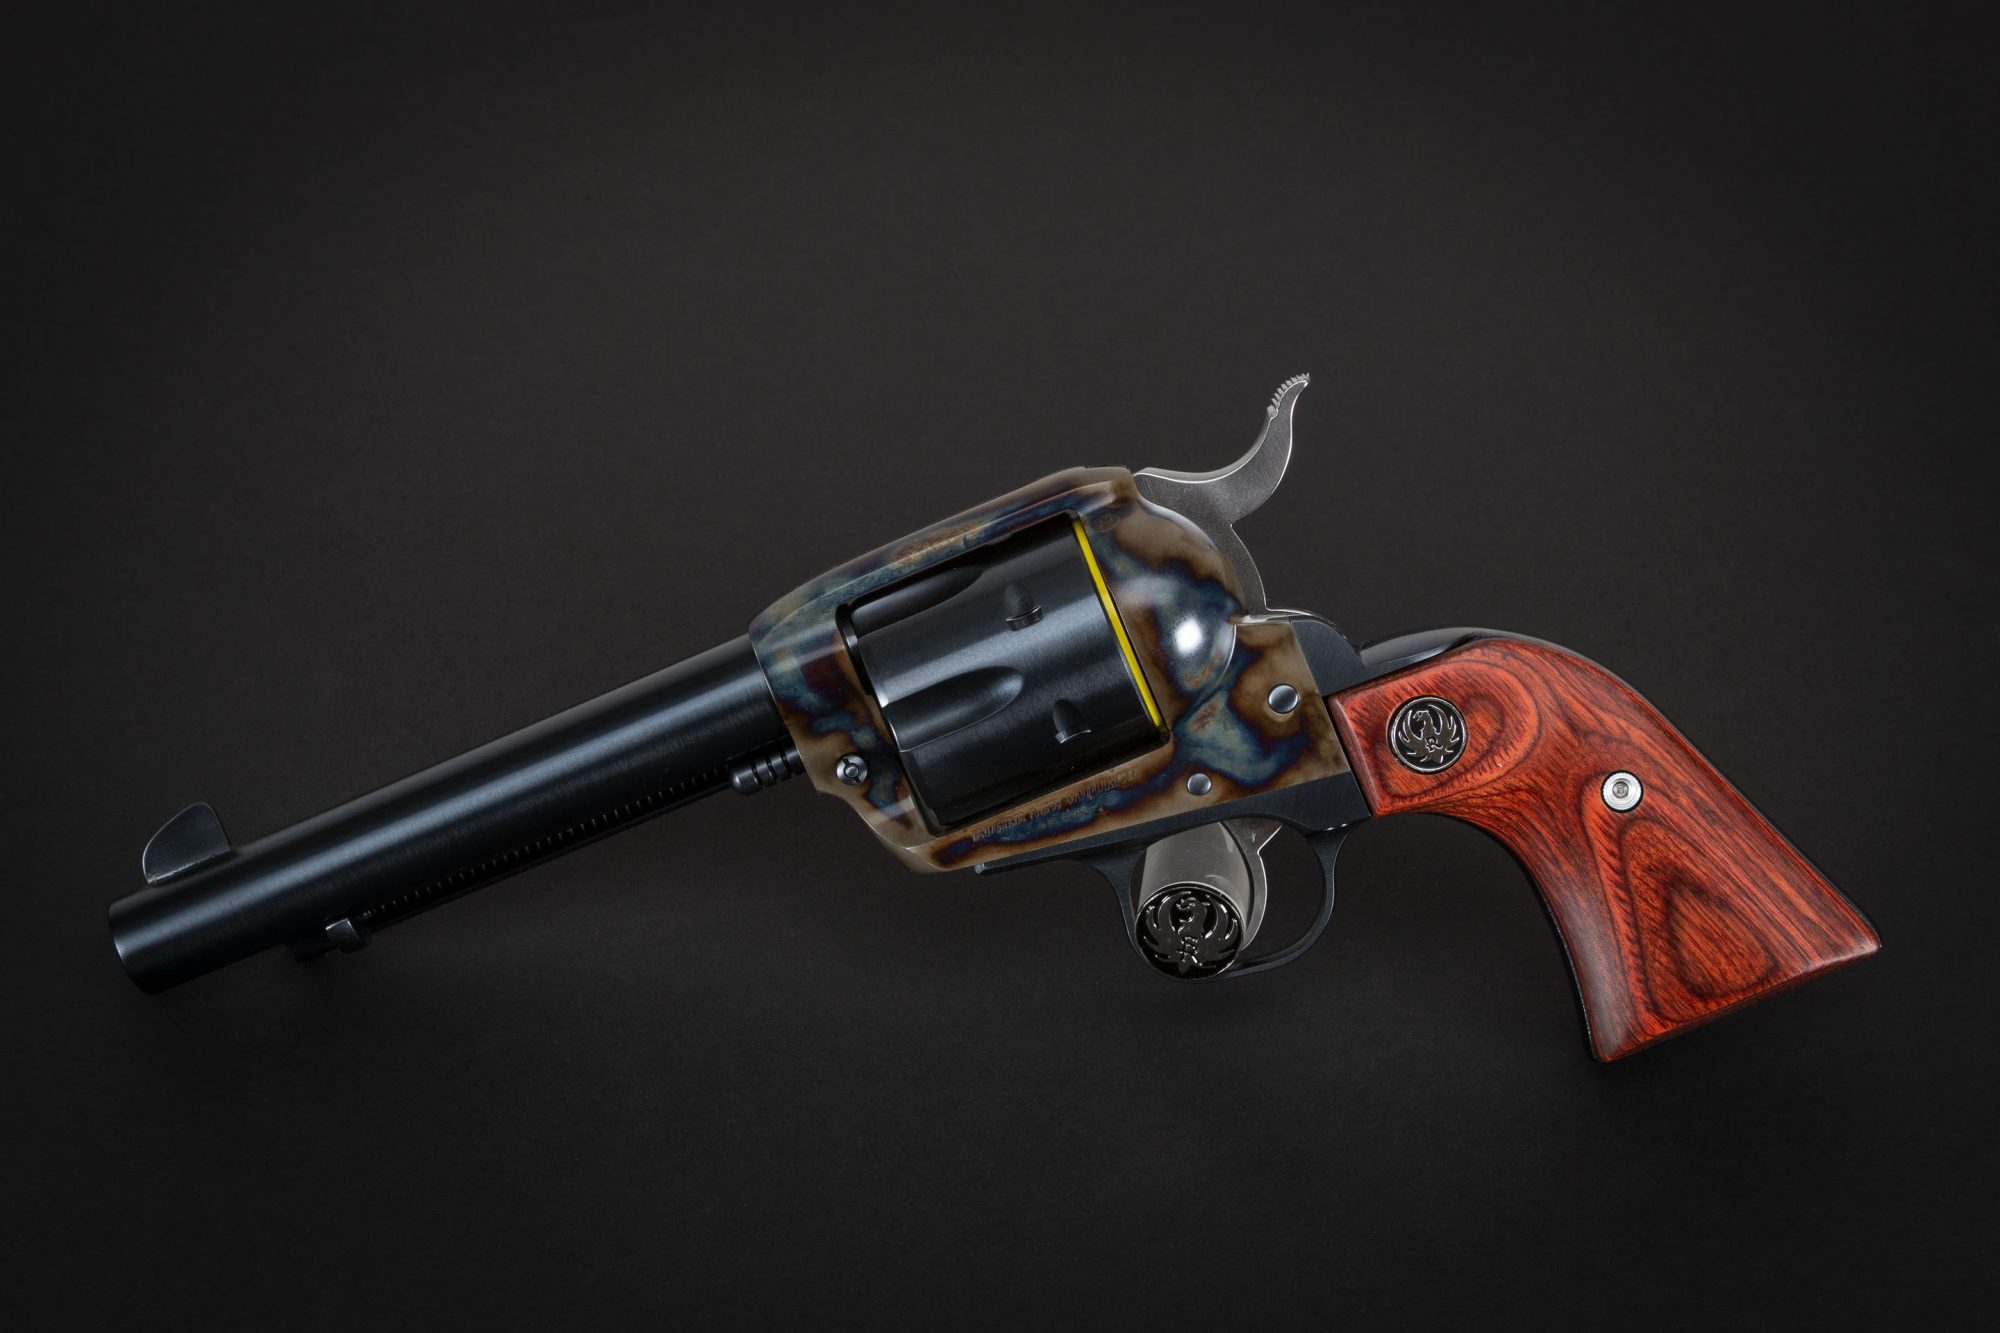 Photo of a Ruger New Vaquero single action revolver, featuring restoration-grade metal finishes by Turnbull Restoration of Bloomfield, NY